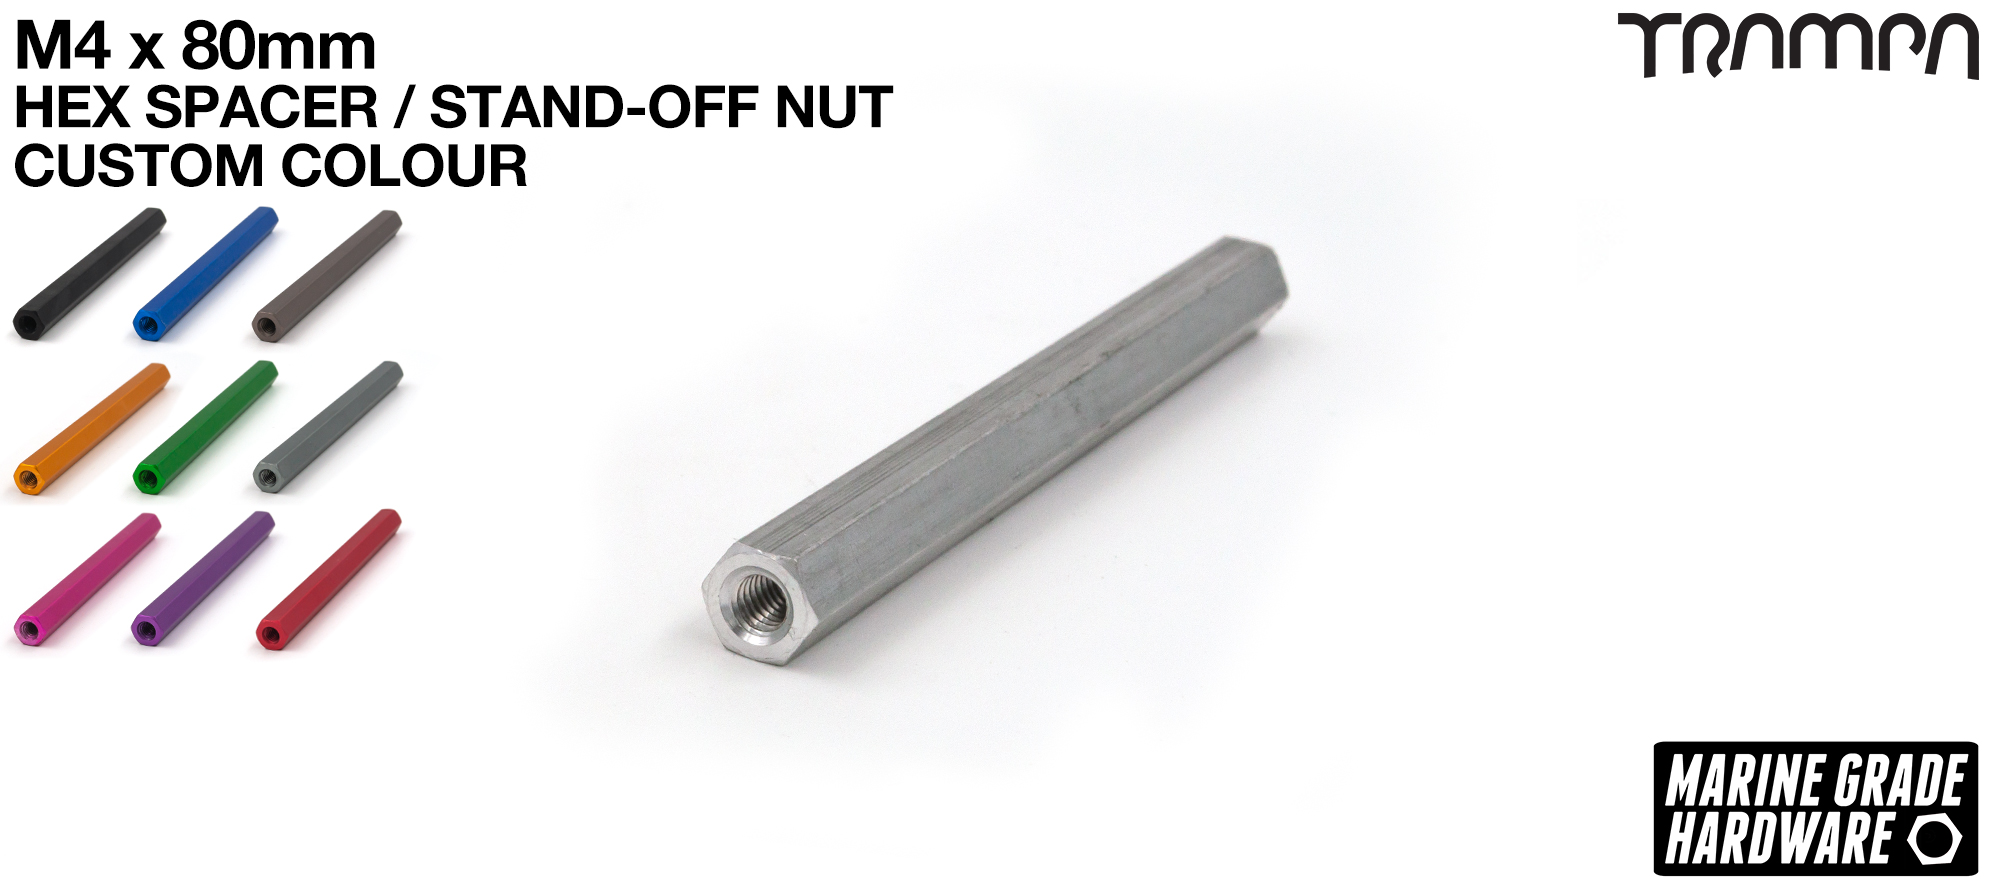 M4 x 80mm Aluminium Threaded Spacer Nut Used for assembling the BEAST Battery Boxes 